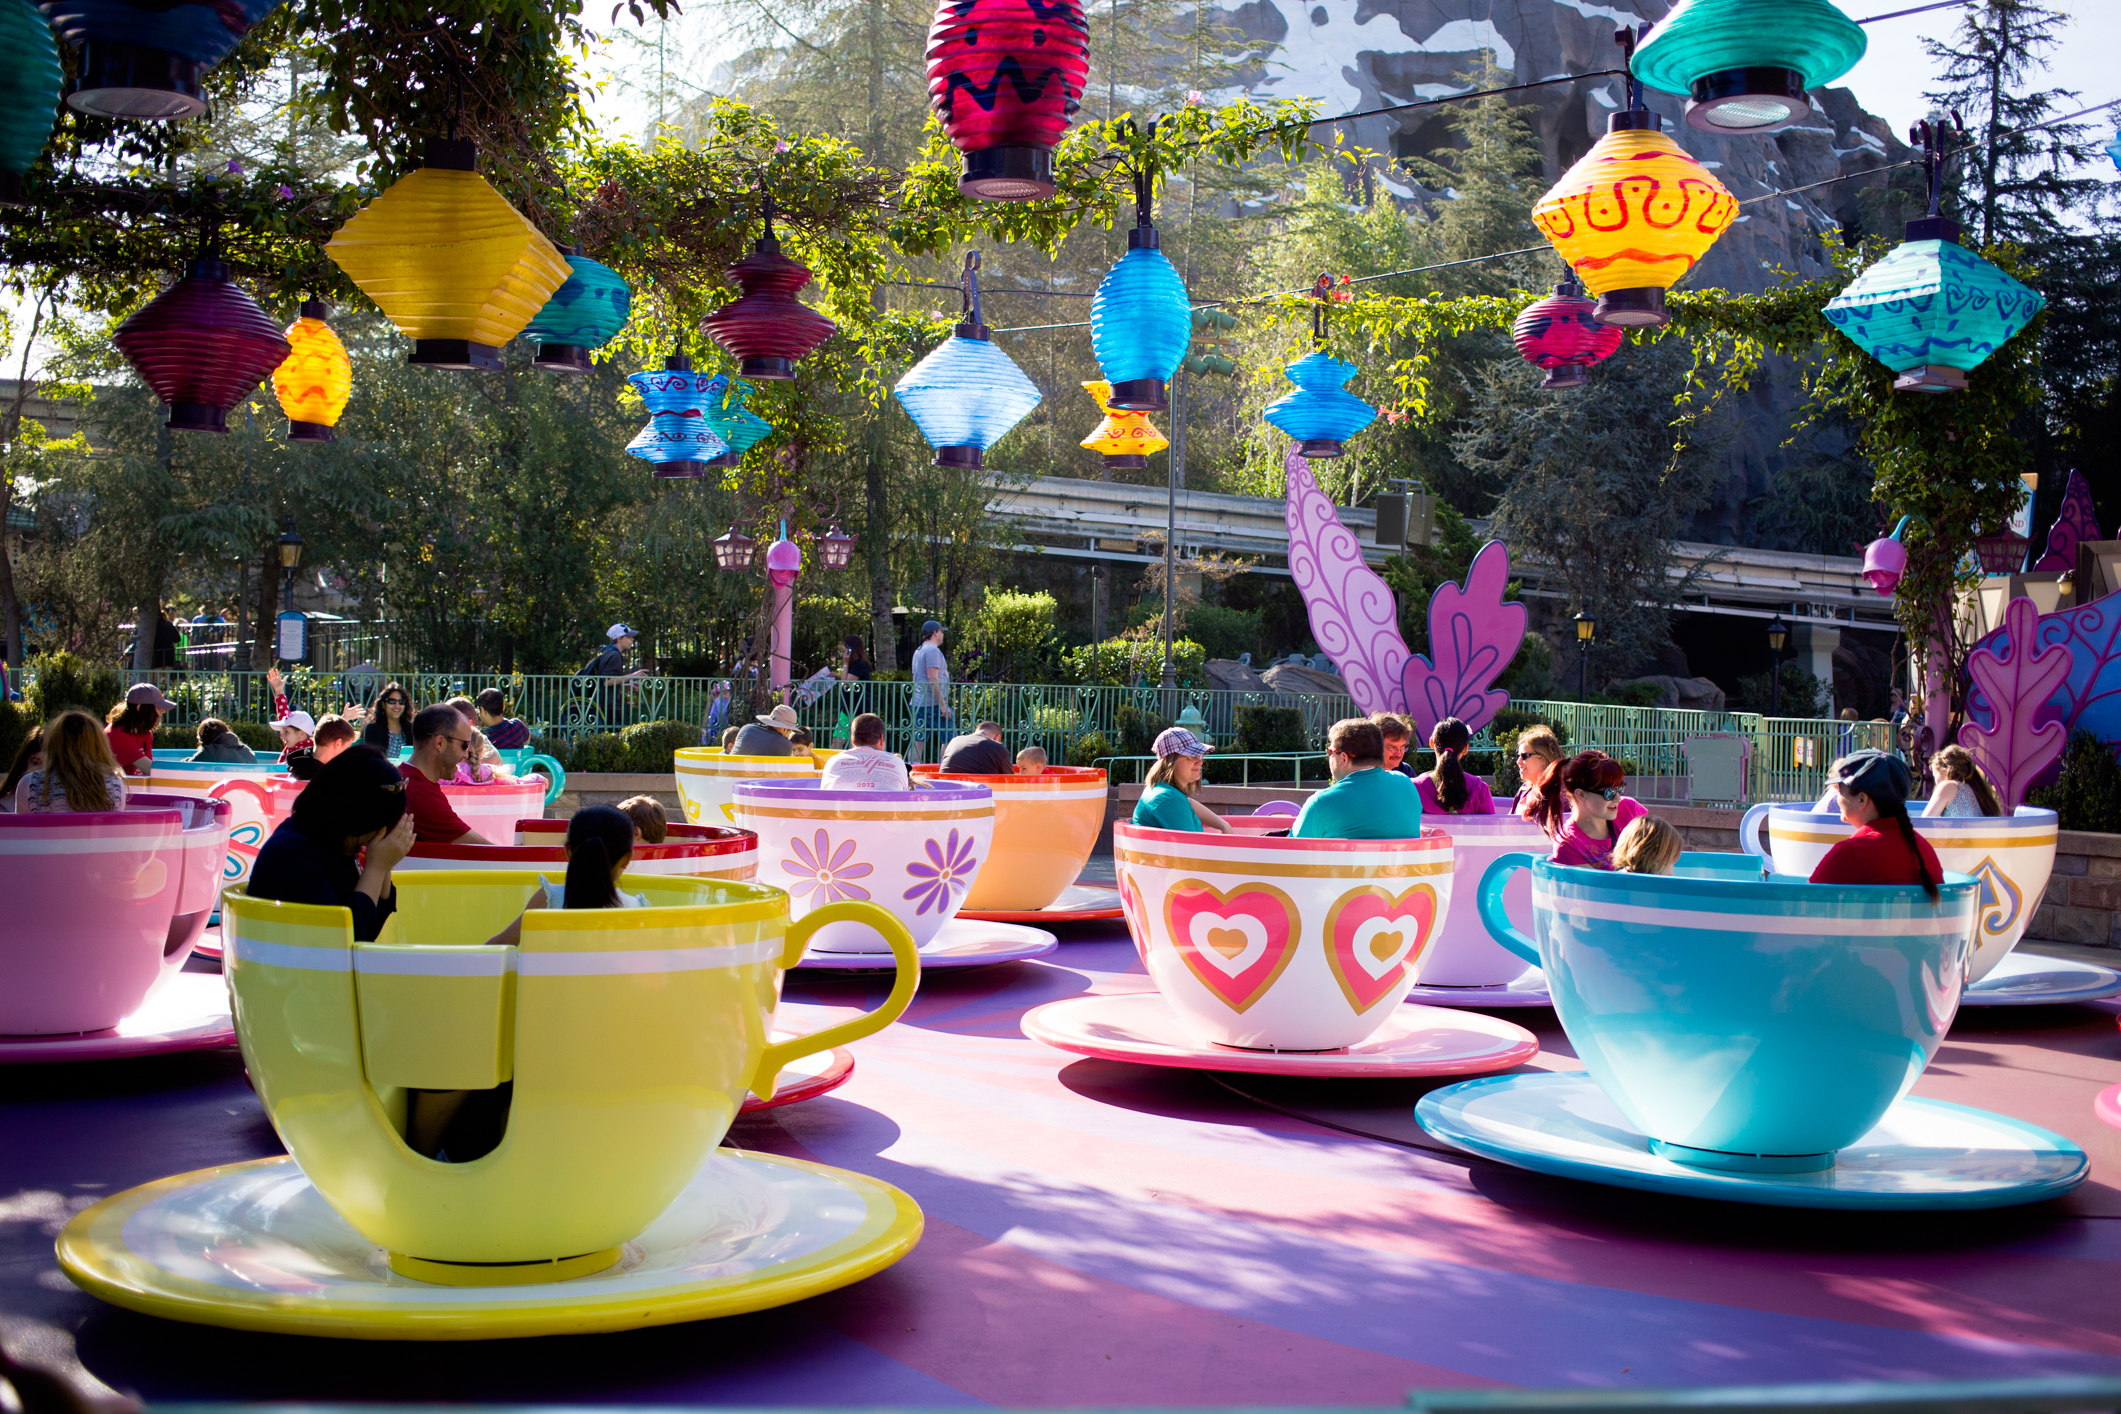 The outdoor teacups ride at Disneyland.